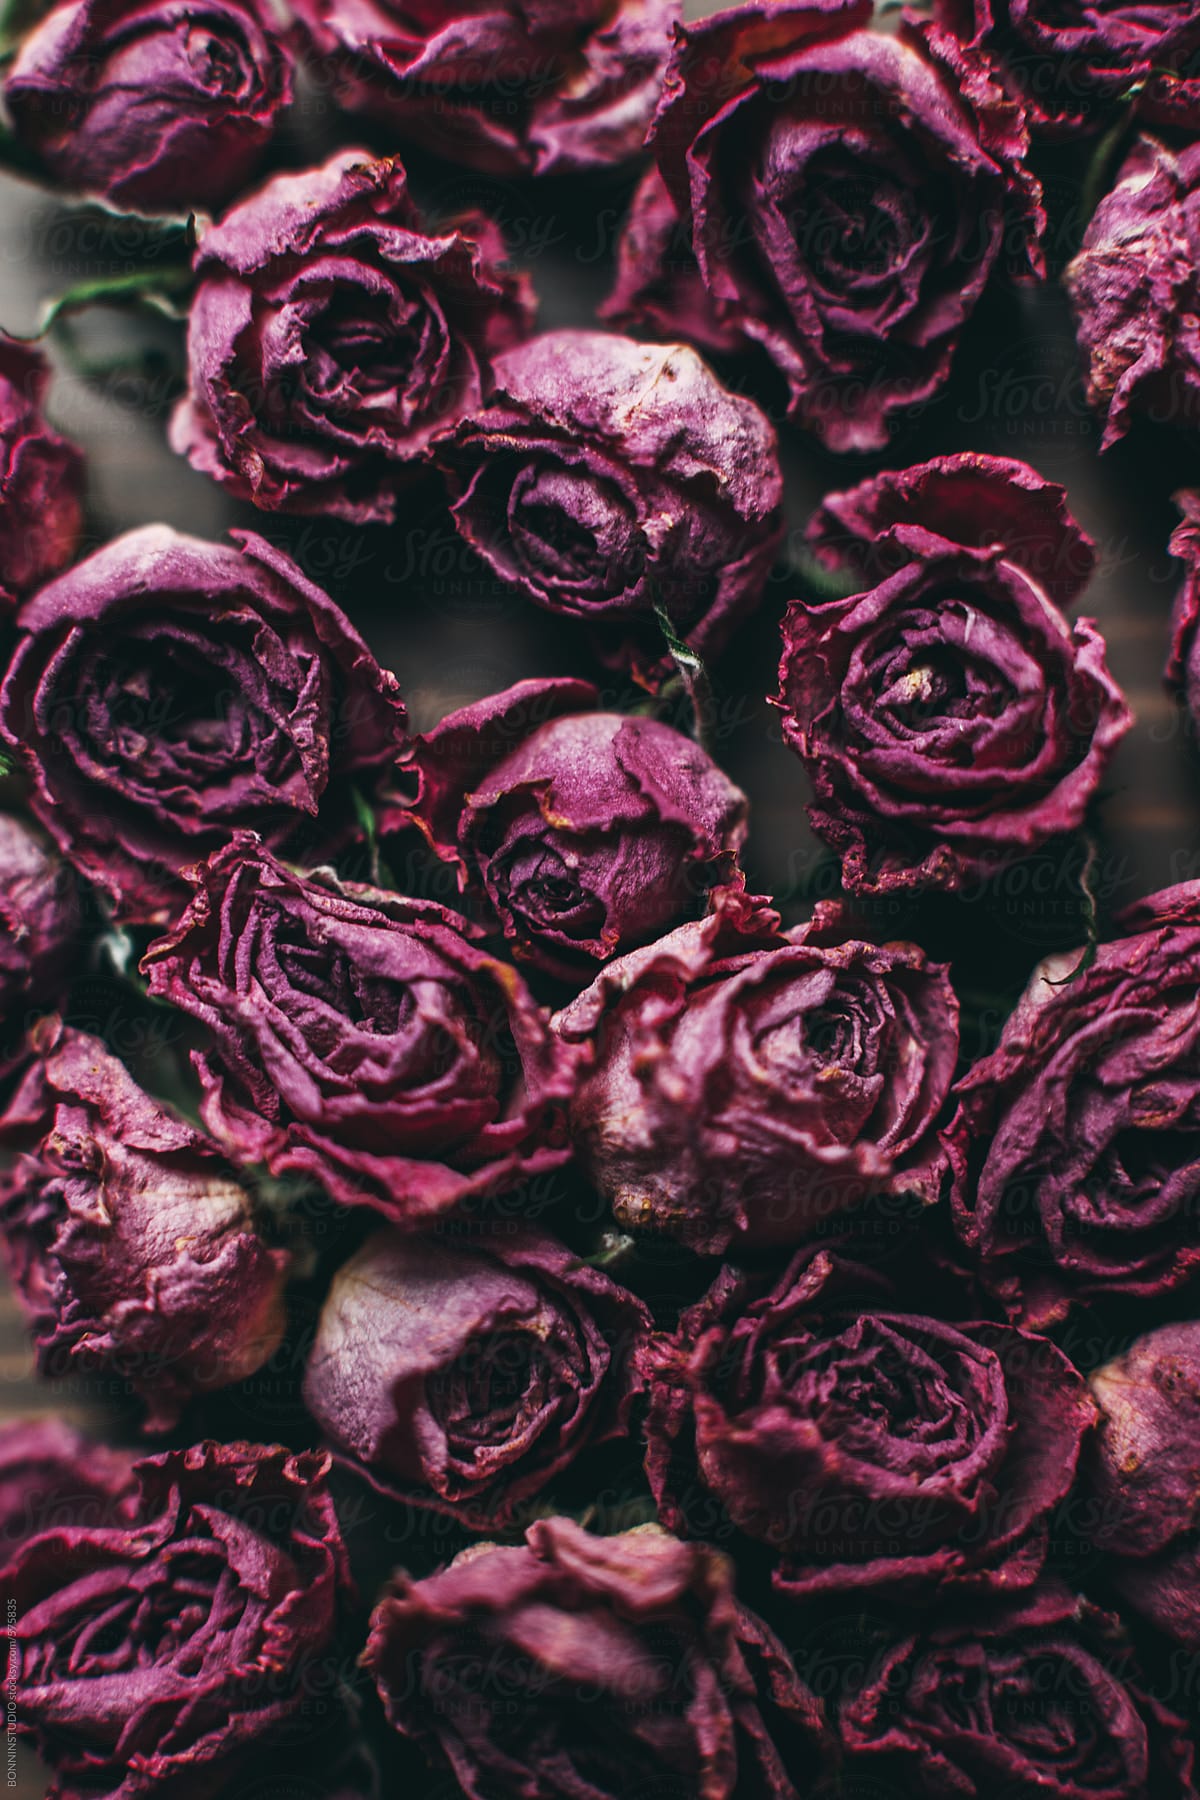 "Dried Roses On Wooden Background." by Stocksy Contributor "BONNINSTUDIO " - Stocksy